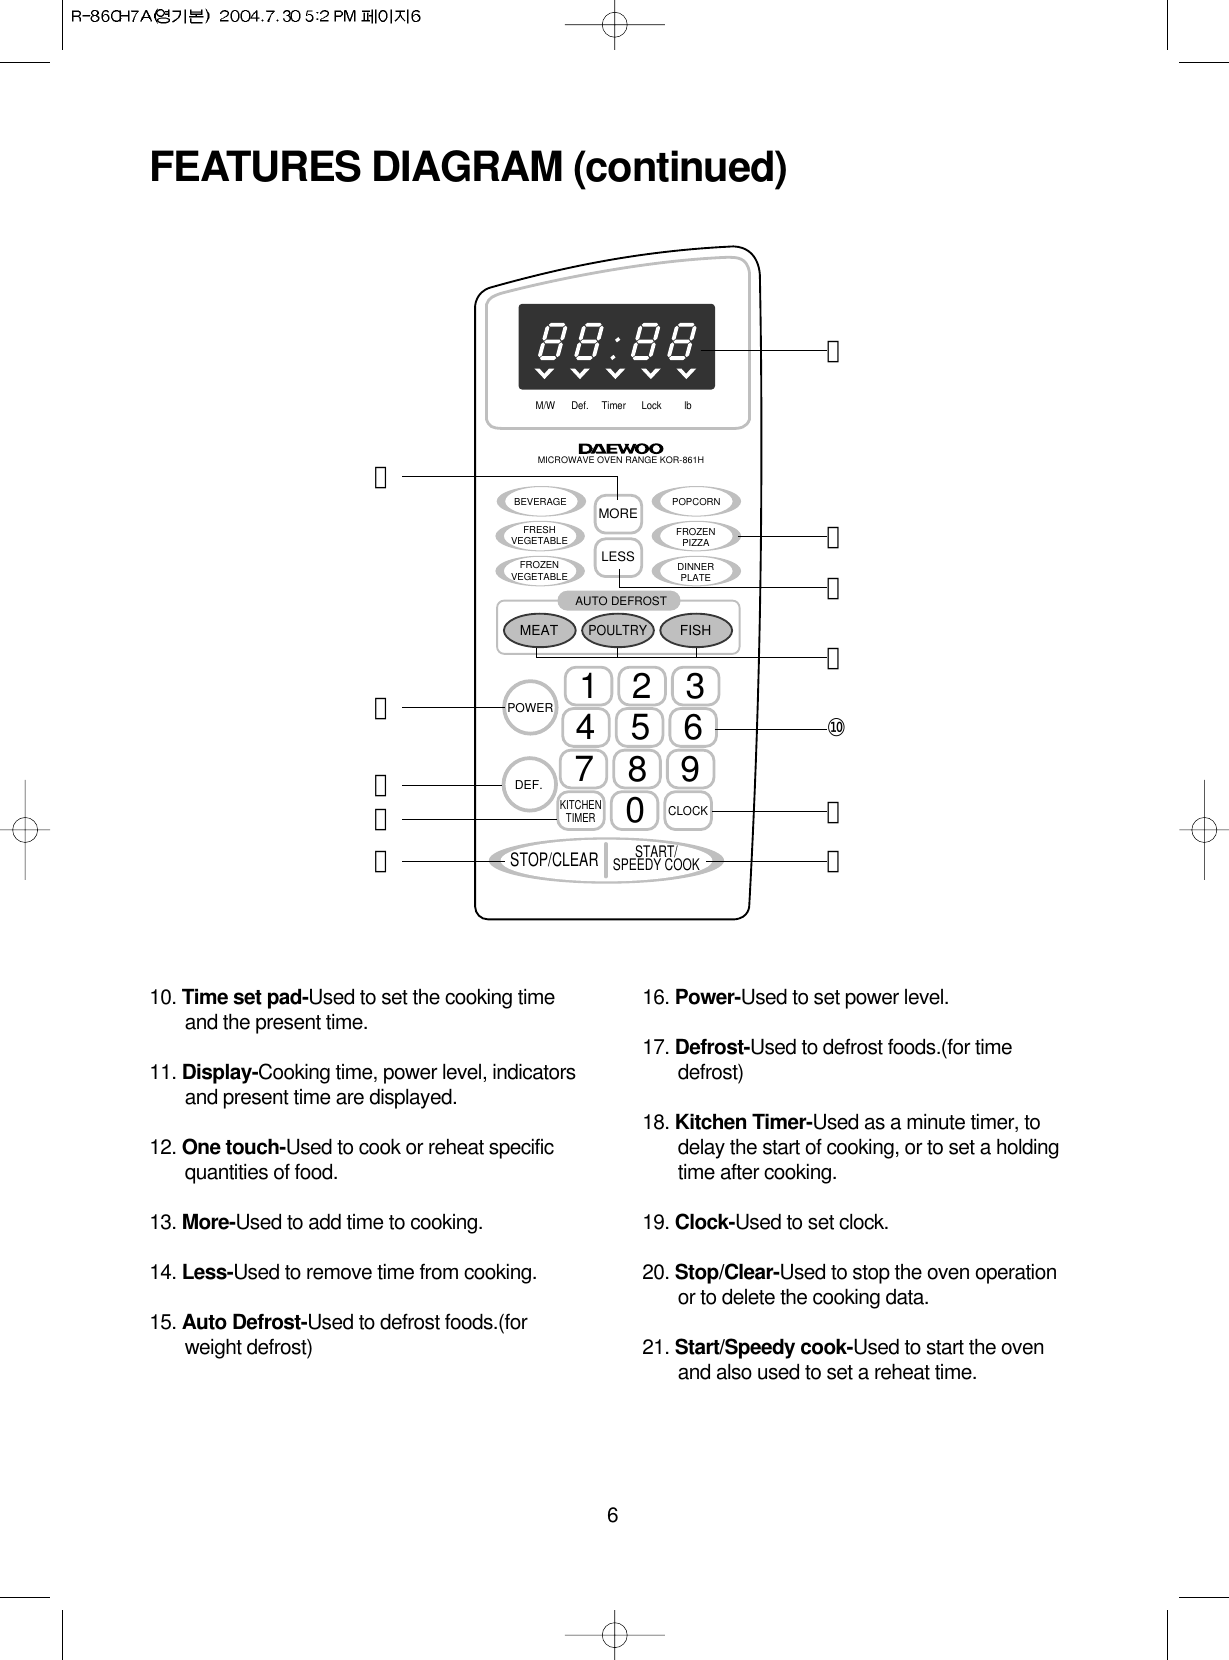 610. Time set pad-Used to set the cooking timeand the present time.11. Display-Cooking time, power level, indicatorsand present time are displayed.12. One touch-Used to cook or reheat specificquantities of food. 13. More-Used to add time to cooking.     14. Less-Used to remove time from cooking.15. Auto Defrost-Used to defrost foods.(forweight defrost)16. Power-Used to set power level.17. Defrost-Used to defrost foods.(for timedefrost)18. Kitchen Timer-Used as a minute timer, todelay the start of cooking, or to set a holdingtime after cooking.19. Clock-Used to set clock. 20. Stop/Clear-Used to stop the oven operation or to delete the cooking data.21. Start/Speedy cook-Used to start the ovenand also used to set a reheat time.FEATURES DIAGRAM (continued)M/W Def. Timer Lock lbMORELESSAUTO DEFROSTMEATPOWERDEF.STOP/CLEAR1234567809START/SPEEDY COOKKITCHENTIMERCLOCKPOULTRYFISHBEVERAGE POPCORNFRESHVEGETABLE FROZENPIZZAFROZENVEGETABLE DINNERPLATEMICROWAVE OVEN RANGE KOR-861H⑪⑫⑩⑲󰥝⑳⑰⑯⑬⑱⑭⑮